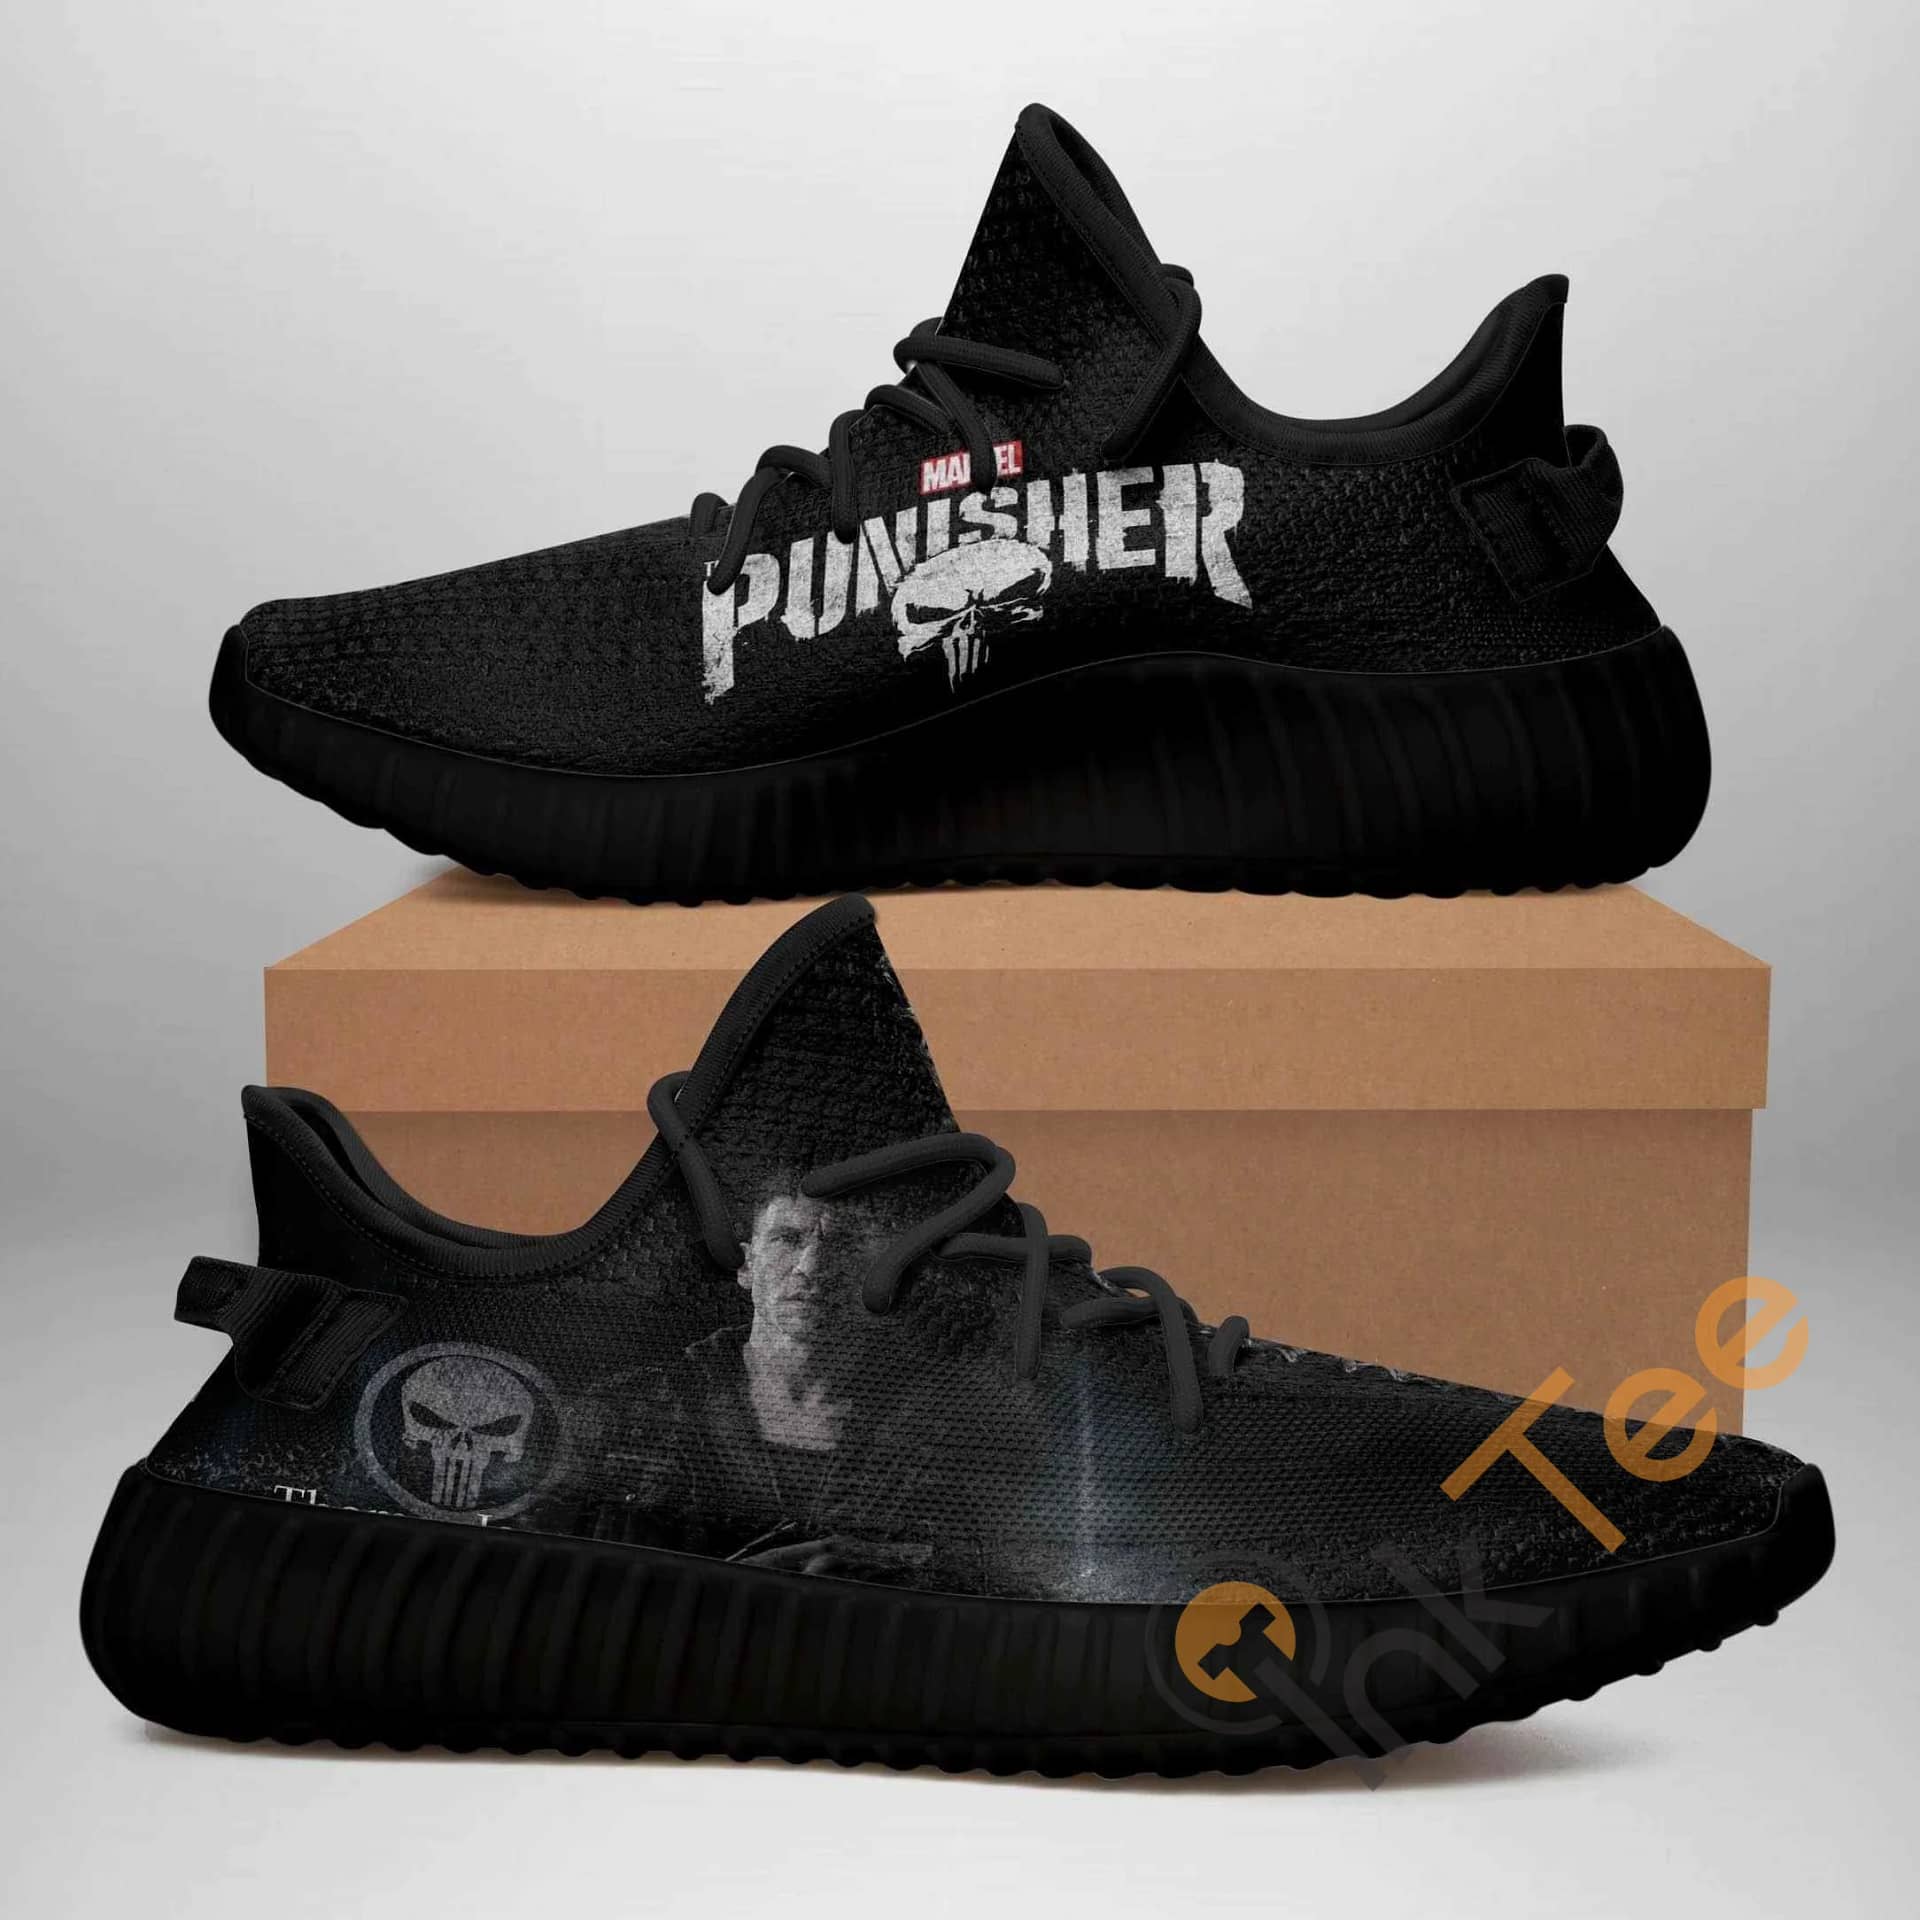 Punisher Black Edition Amazon Best Selling Yeezy Boost